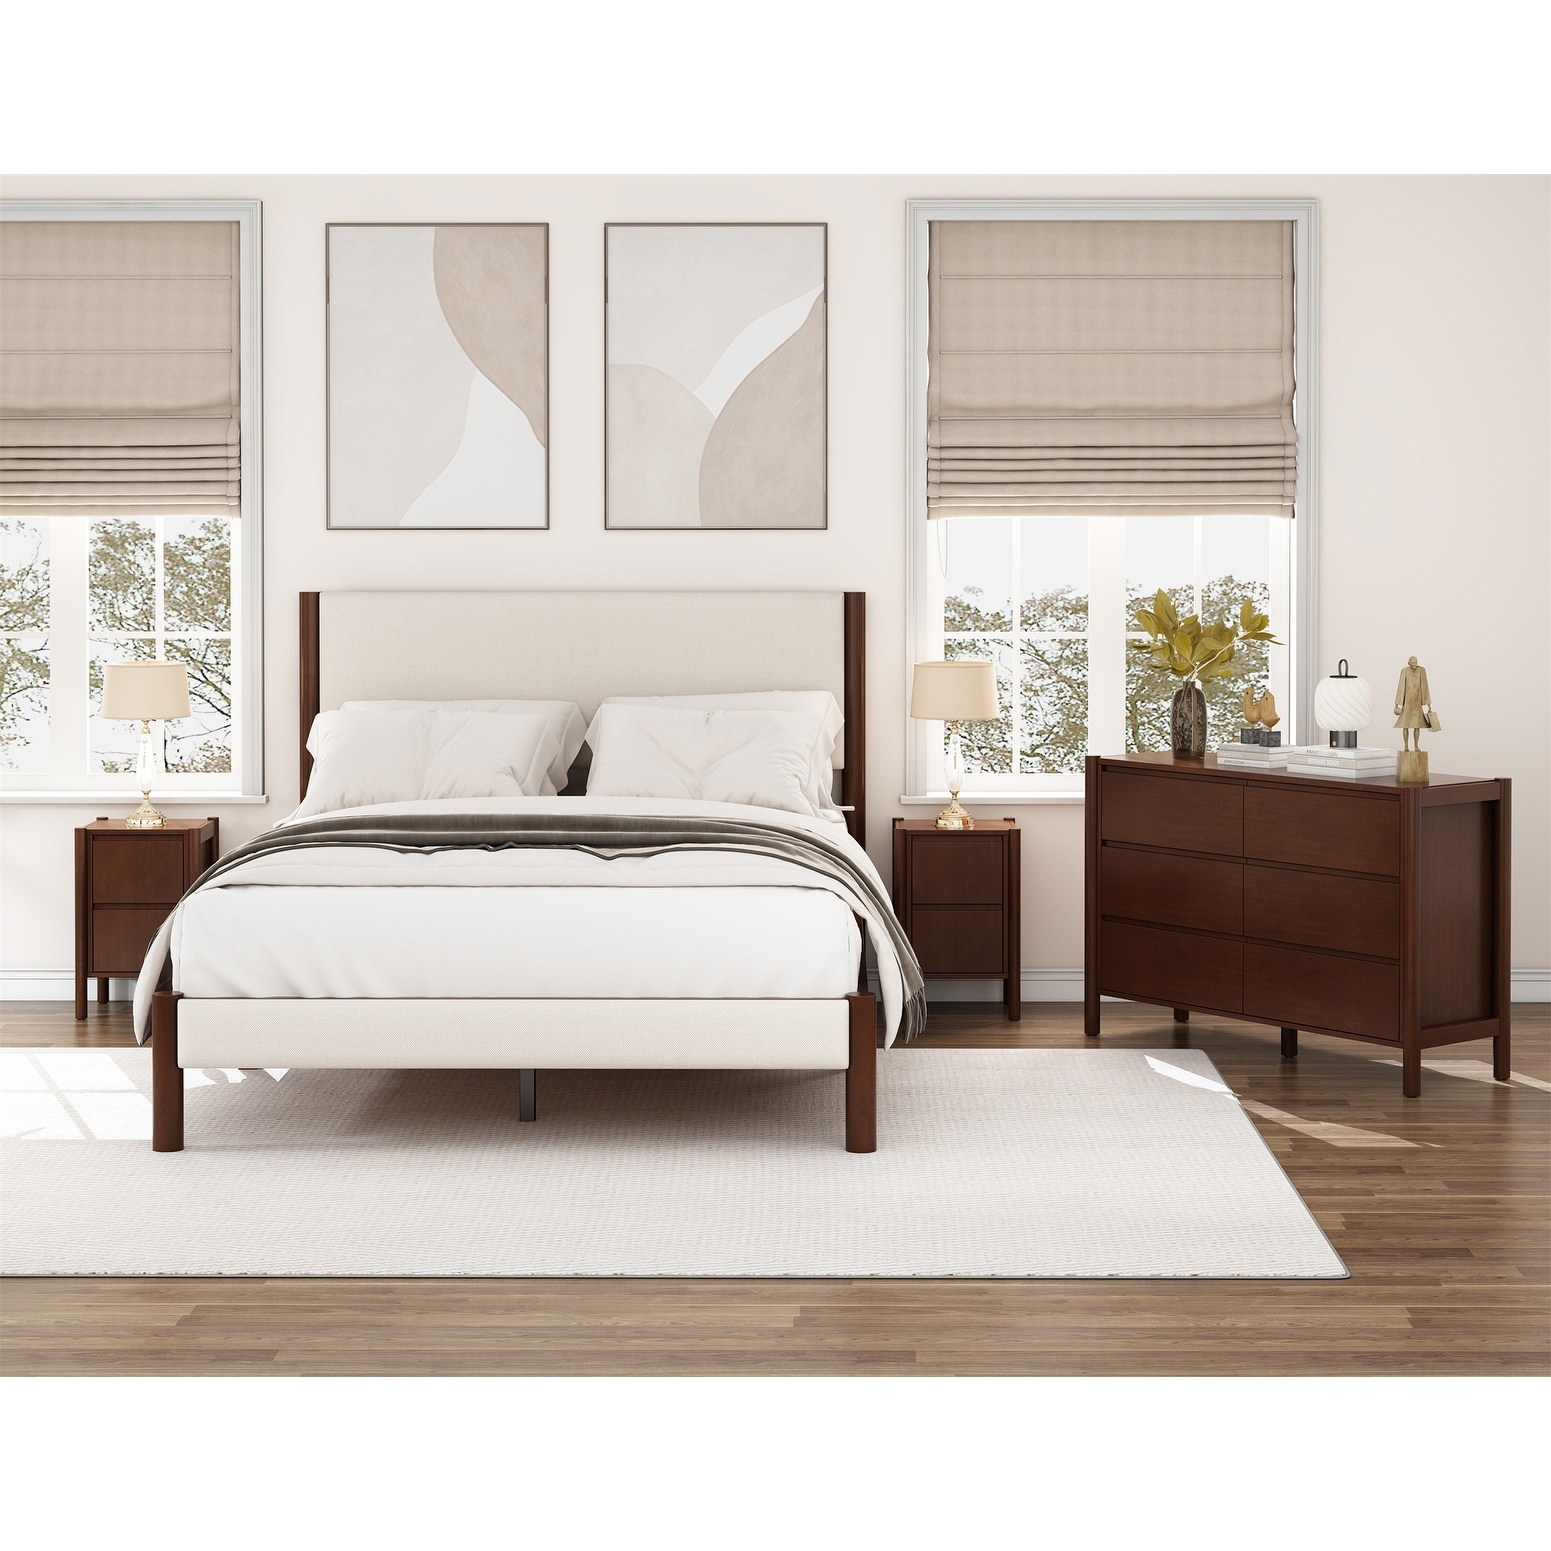 https://ak1.ostkcdn.com/images/products/is/images/direct/605a403a2802e1fe827d473cb49ee1587d97ea12/4-Pieces-Bedroom-Sets-Queen-Platform-Bed-with-2-Nightstands-and-Dresser.jpg